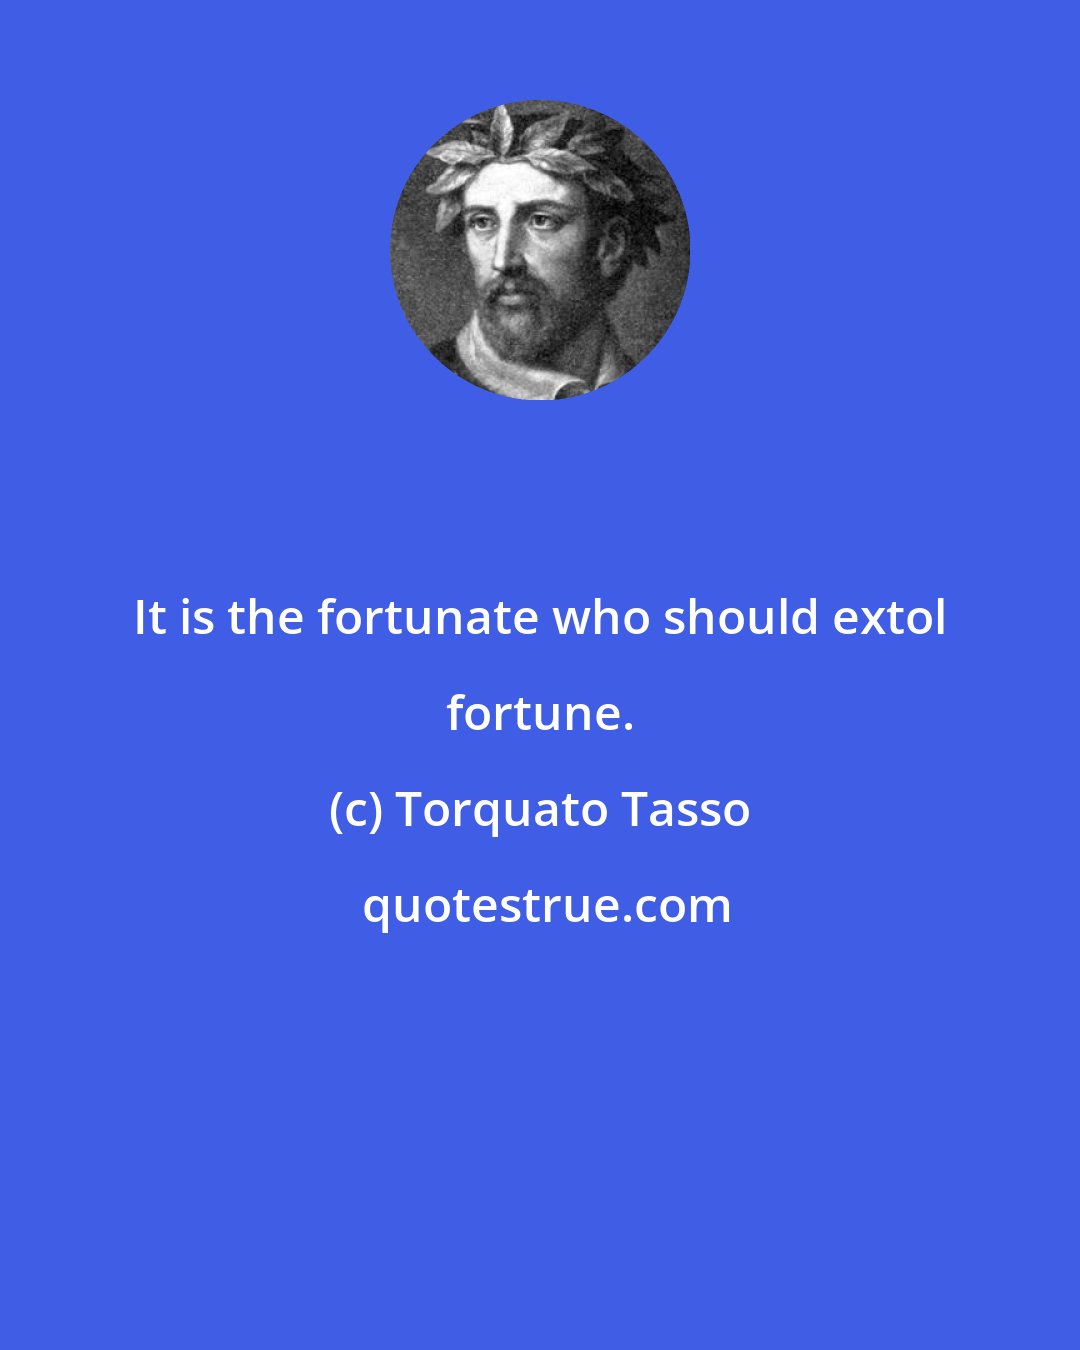 Torquato Tasso: It is the fortunate who should extol fortune.